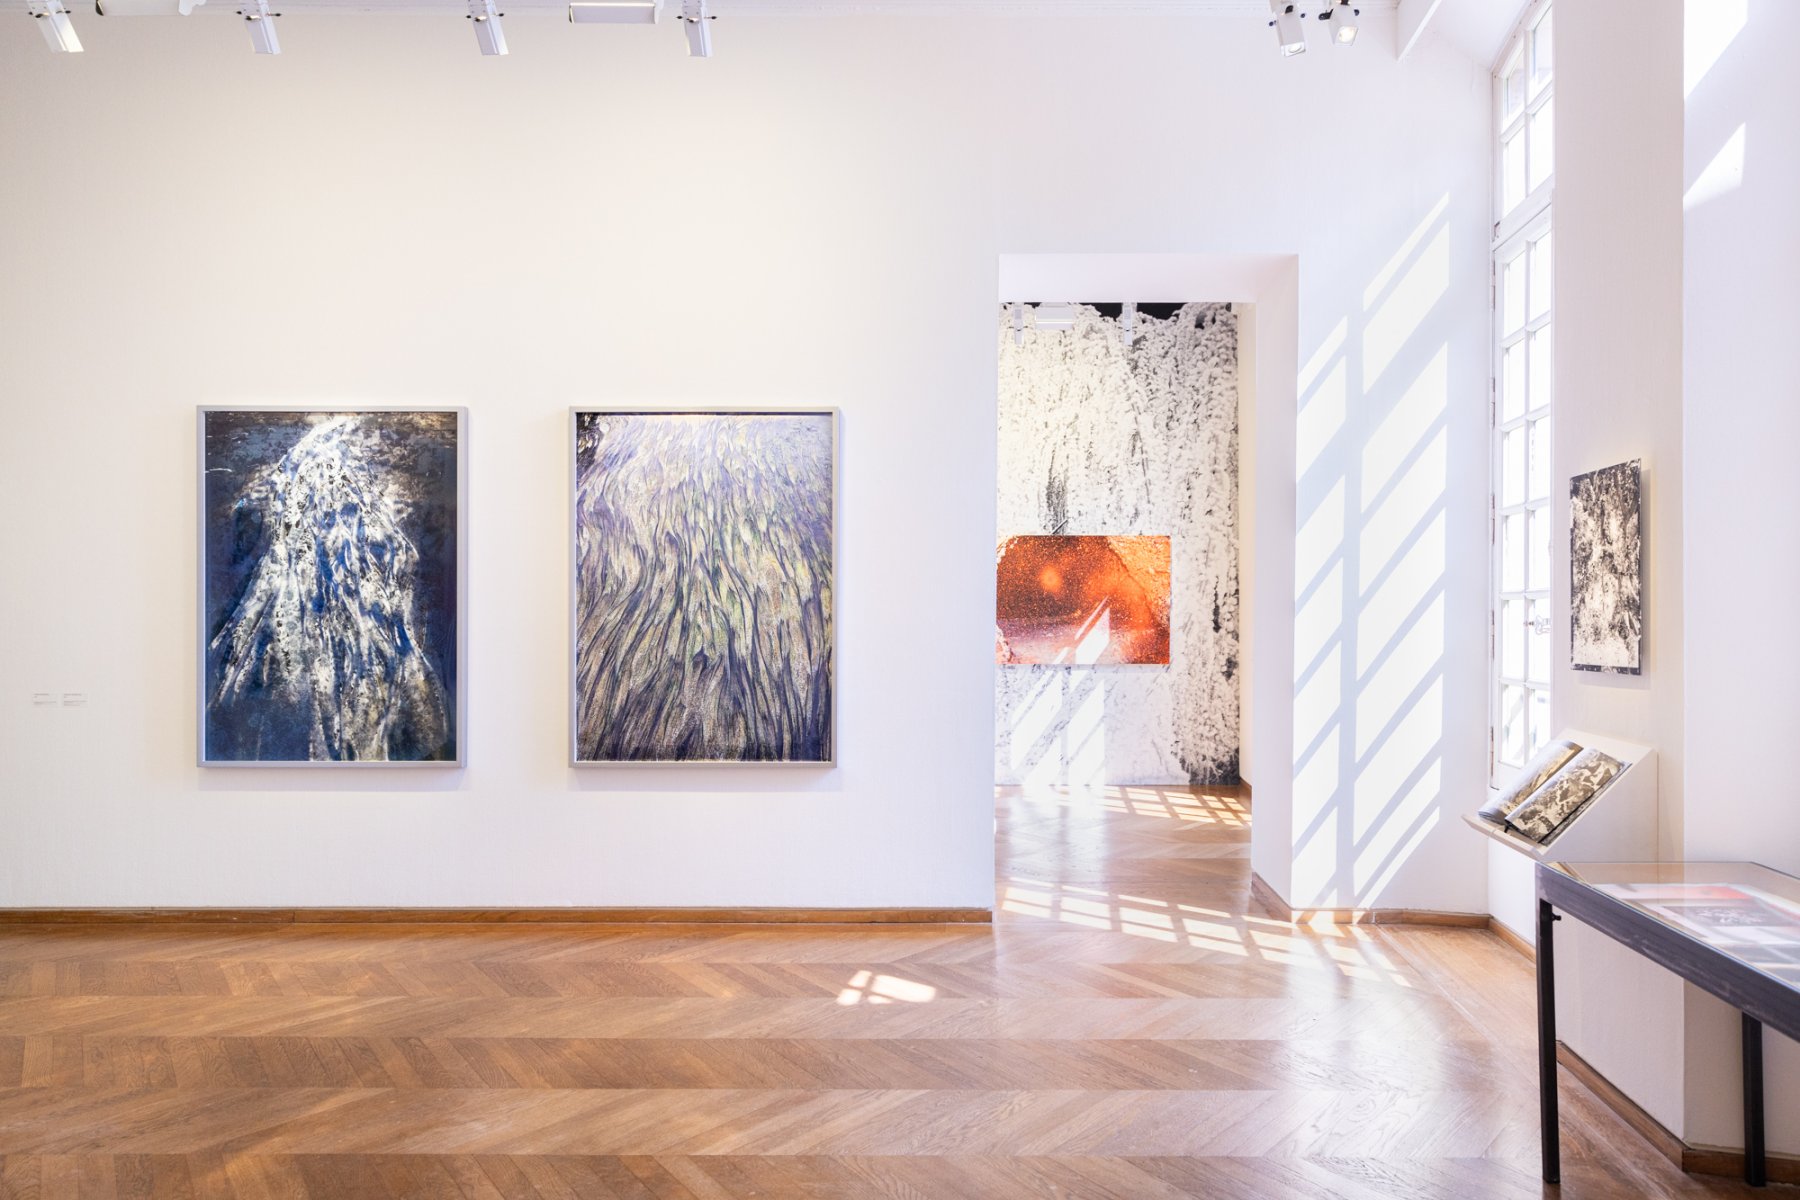 Installation image for Maya Rochat — Poetry of the Earth, at MEP - Maison Européenne de la Photographie